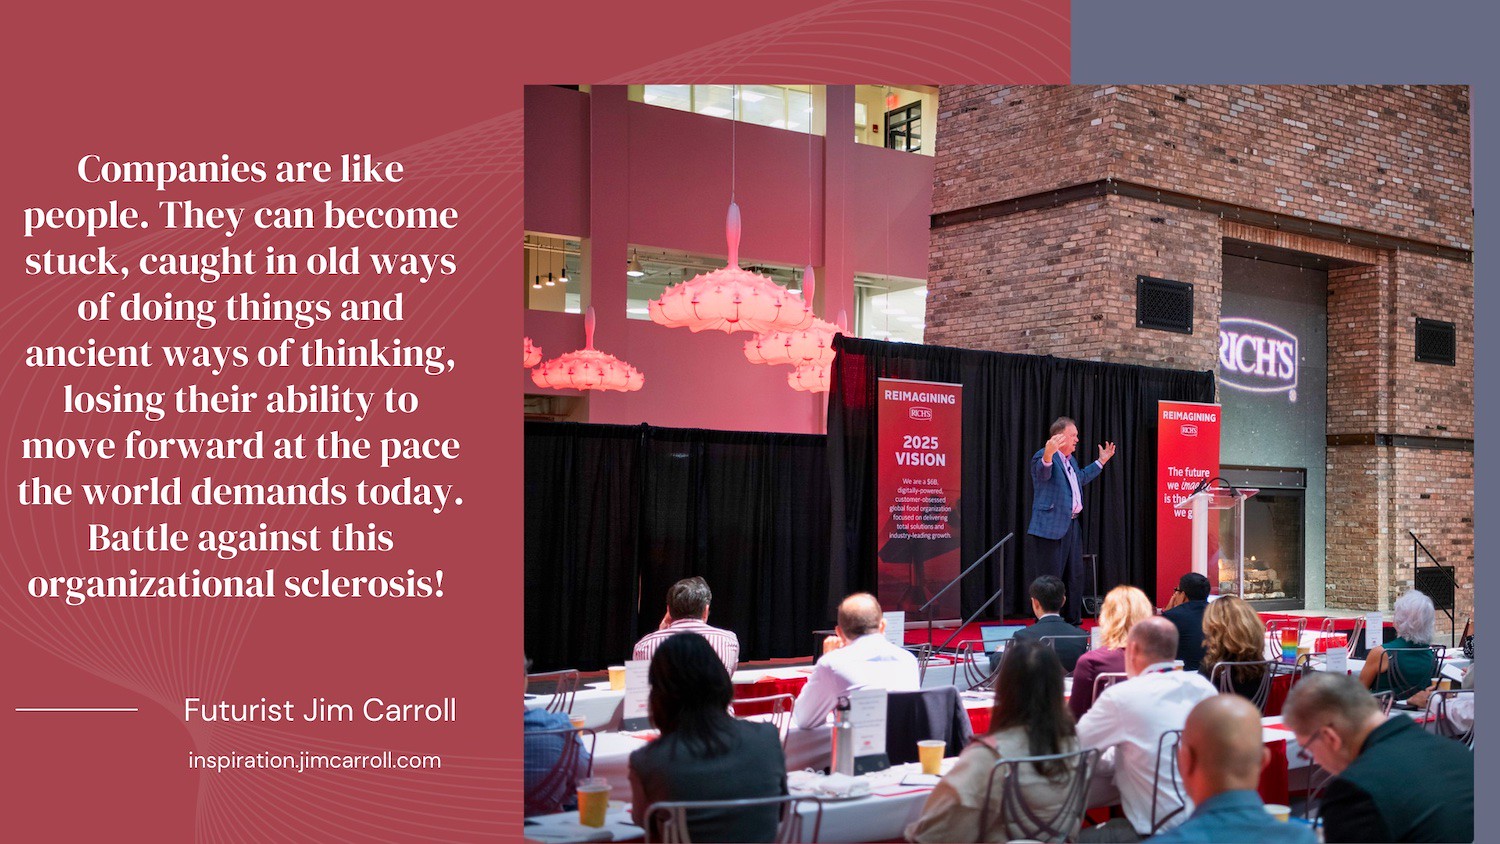 "Companies are like people. They can become stuck, caught in old ways of doing things and ancient ways of thinking,  losing their ability to move forward!" - Futurist Jim Carroll